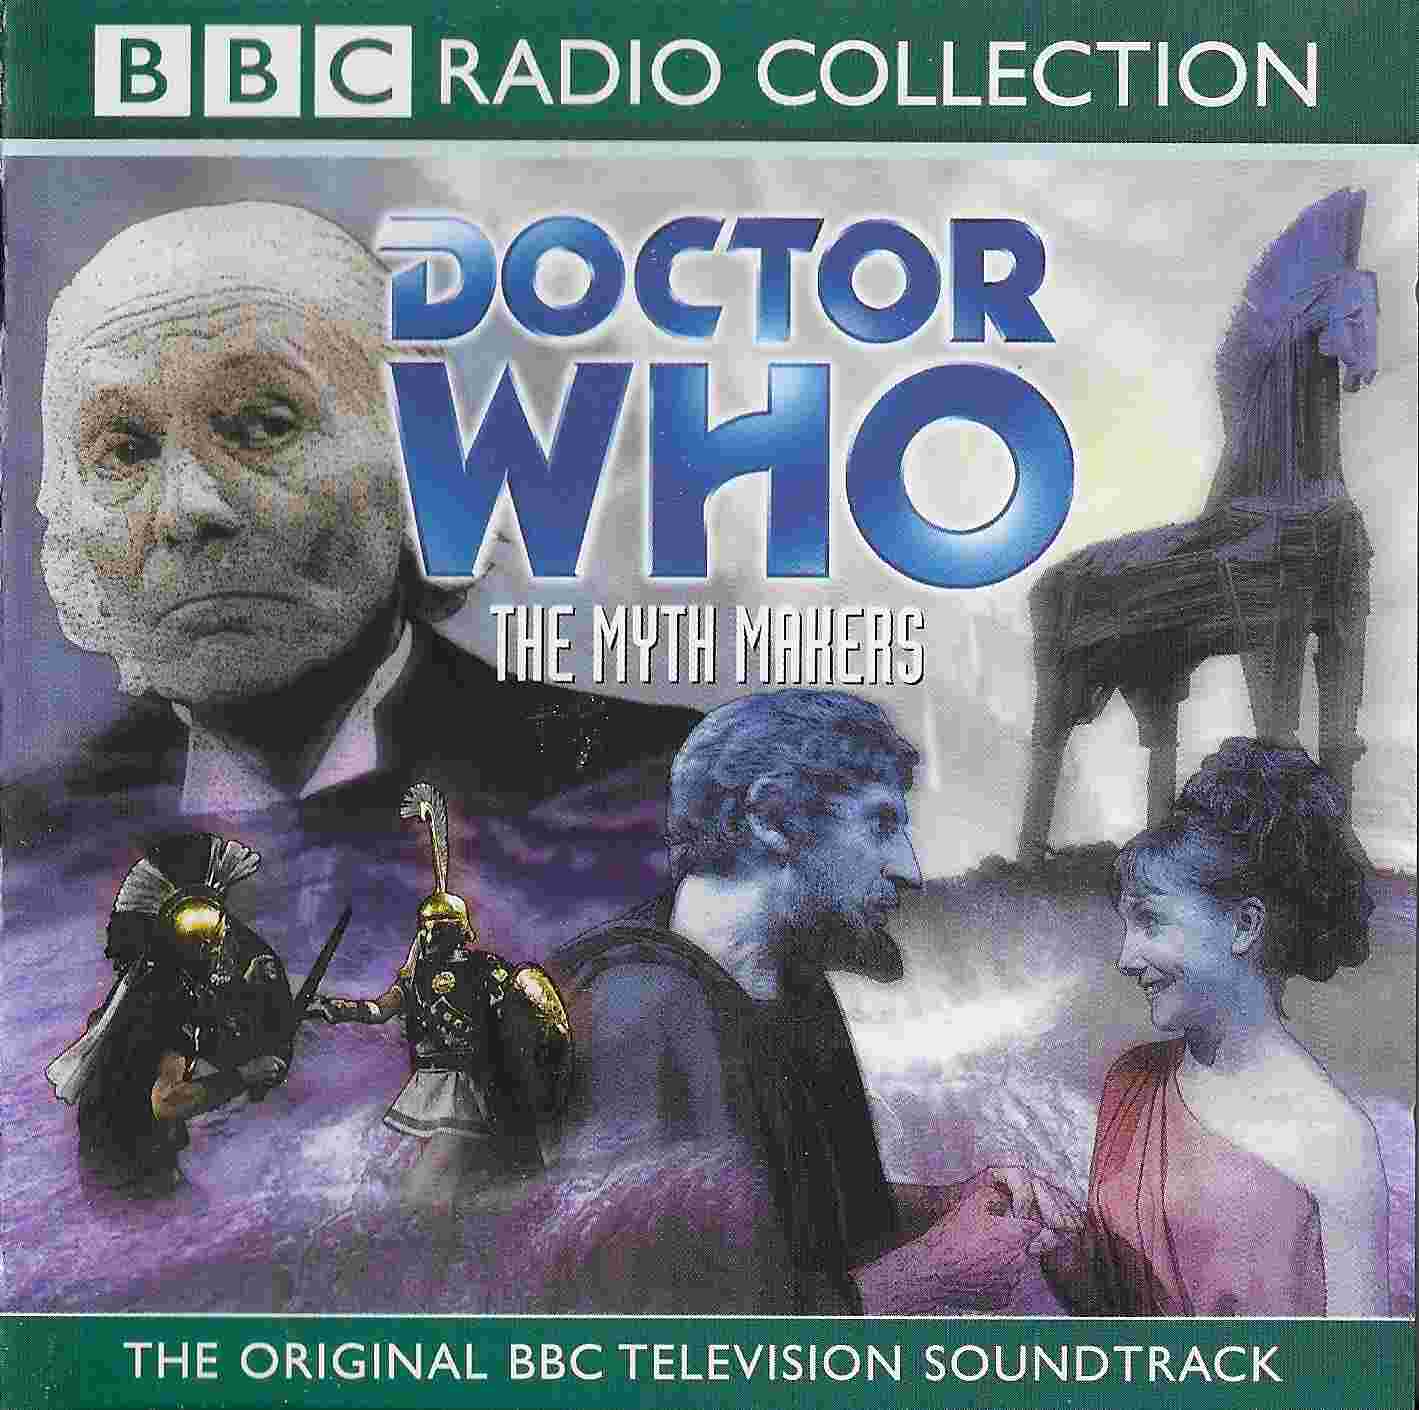 Picture of ISBN 0-563-47777-6 Doctor Who - The myth makers by artist Donald Cotton from the BBC records and Tapes library